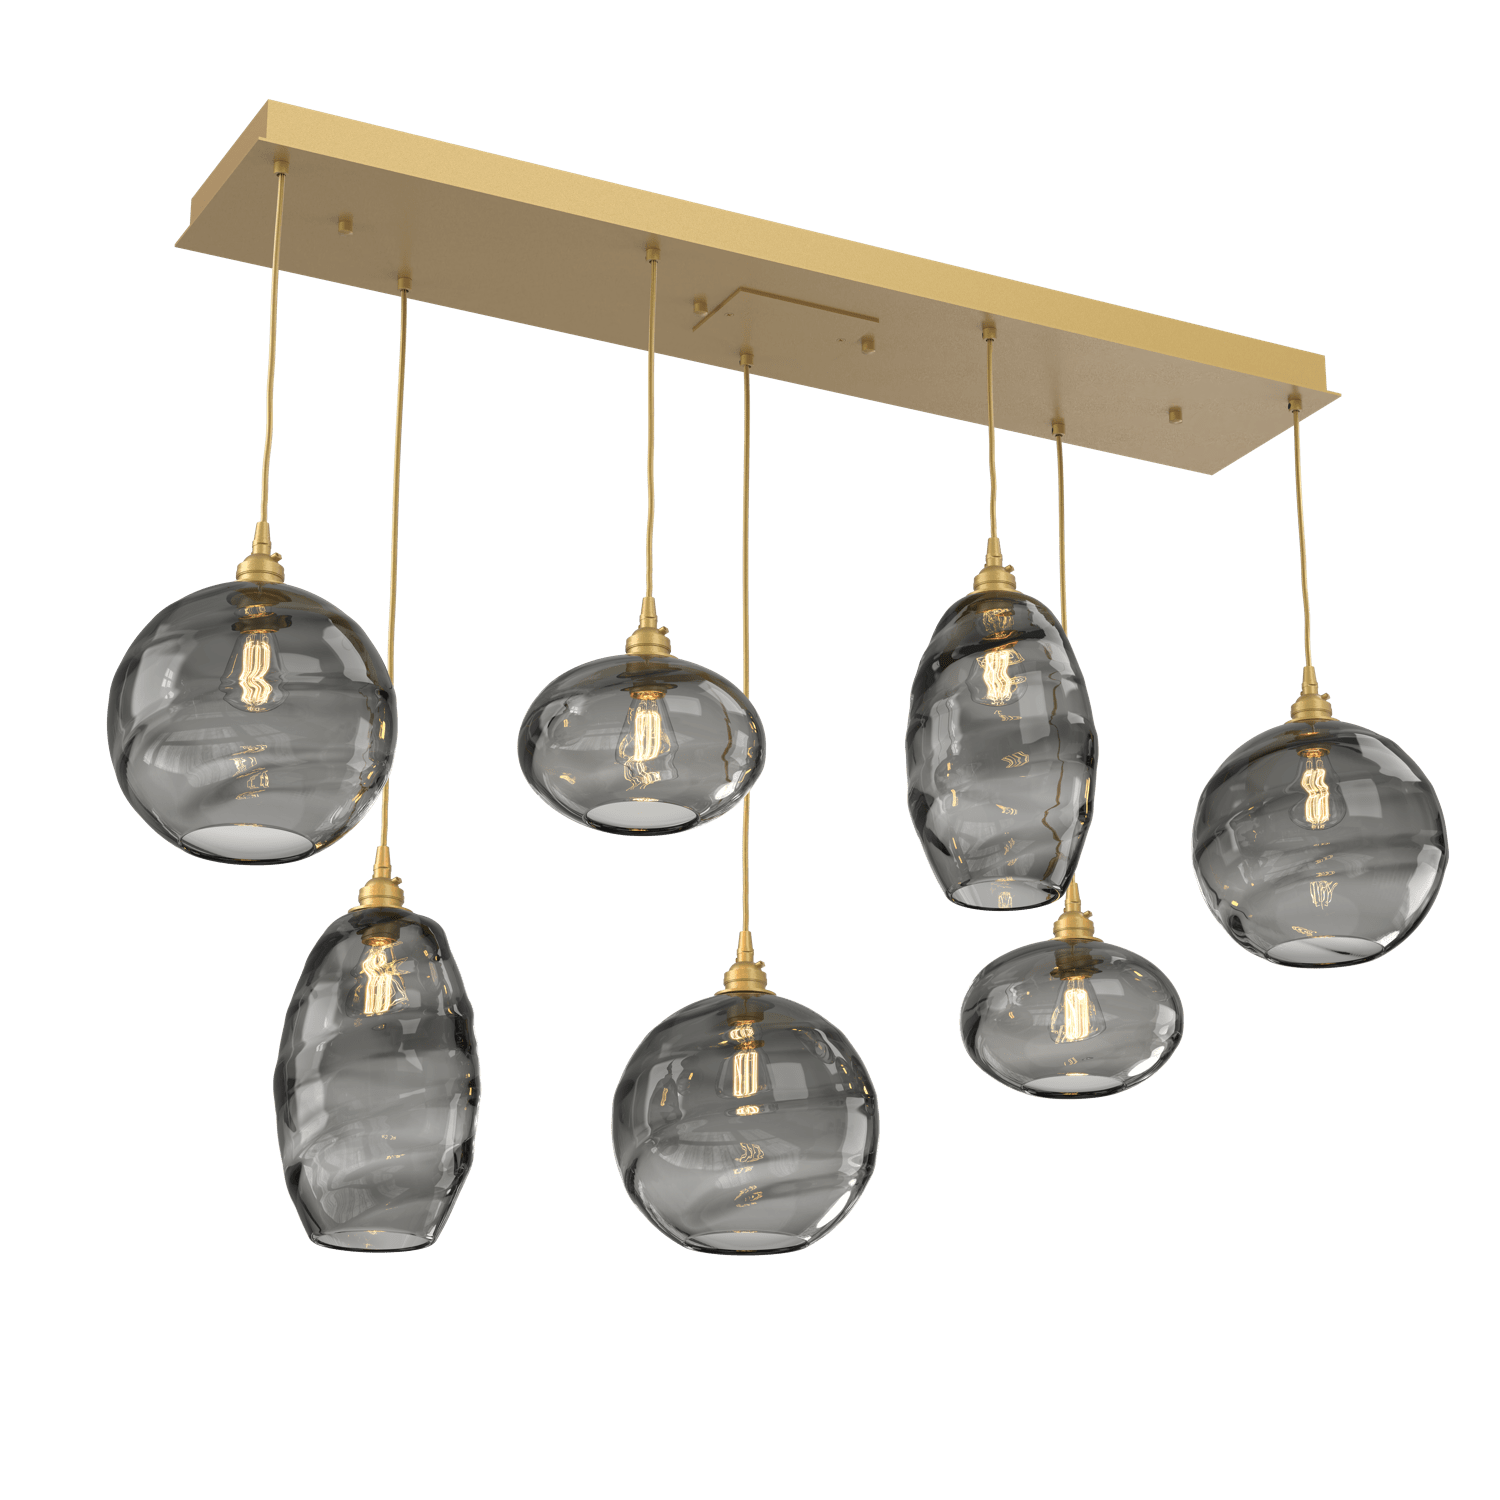 PLB0048-07-GB-OS-Hammerton-Studio-Optic-Blown-Glass-Misto-7-light-linear-pendant-chandelier-with-gilded-brass-finish-and-optic-smoke-blown-glass-shades-and-incandescent-lamping